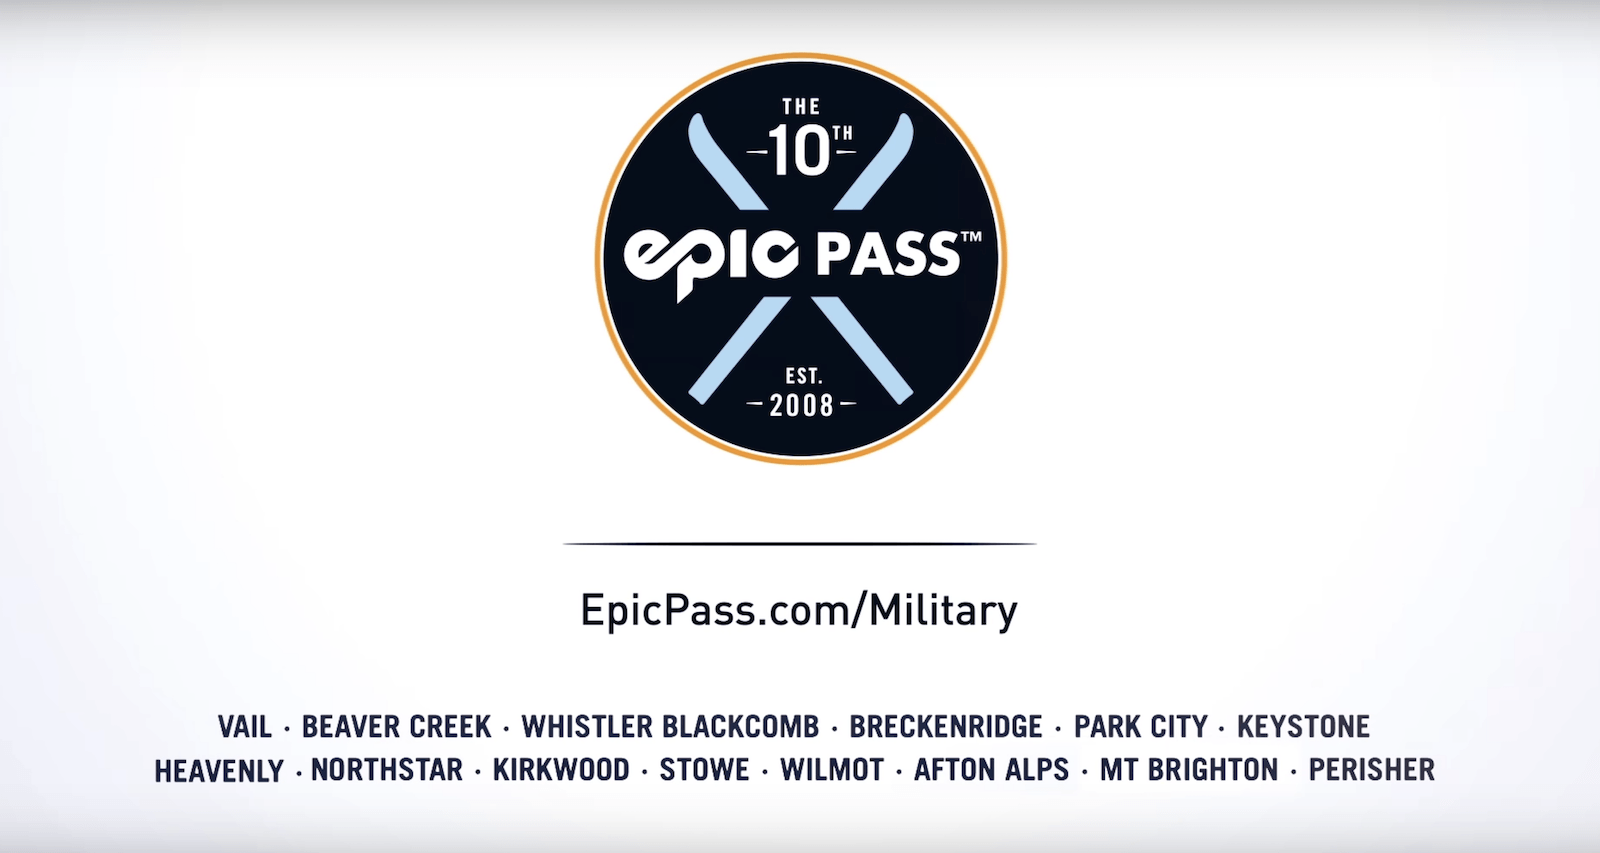 epic local pass cost